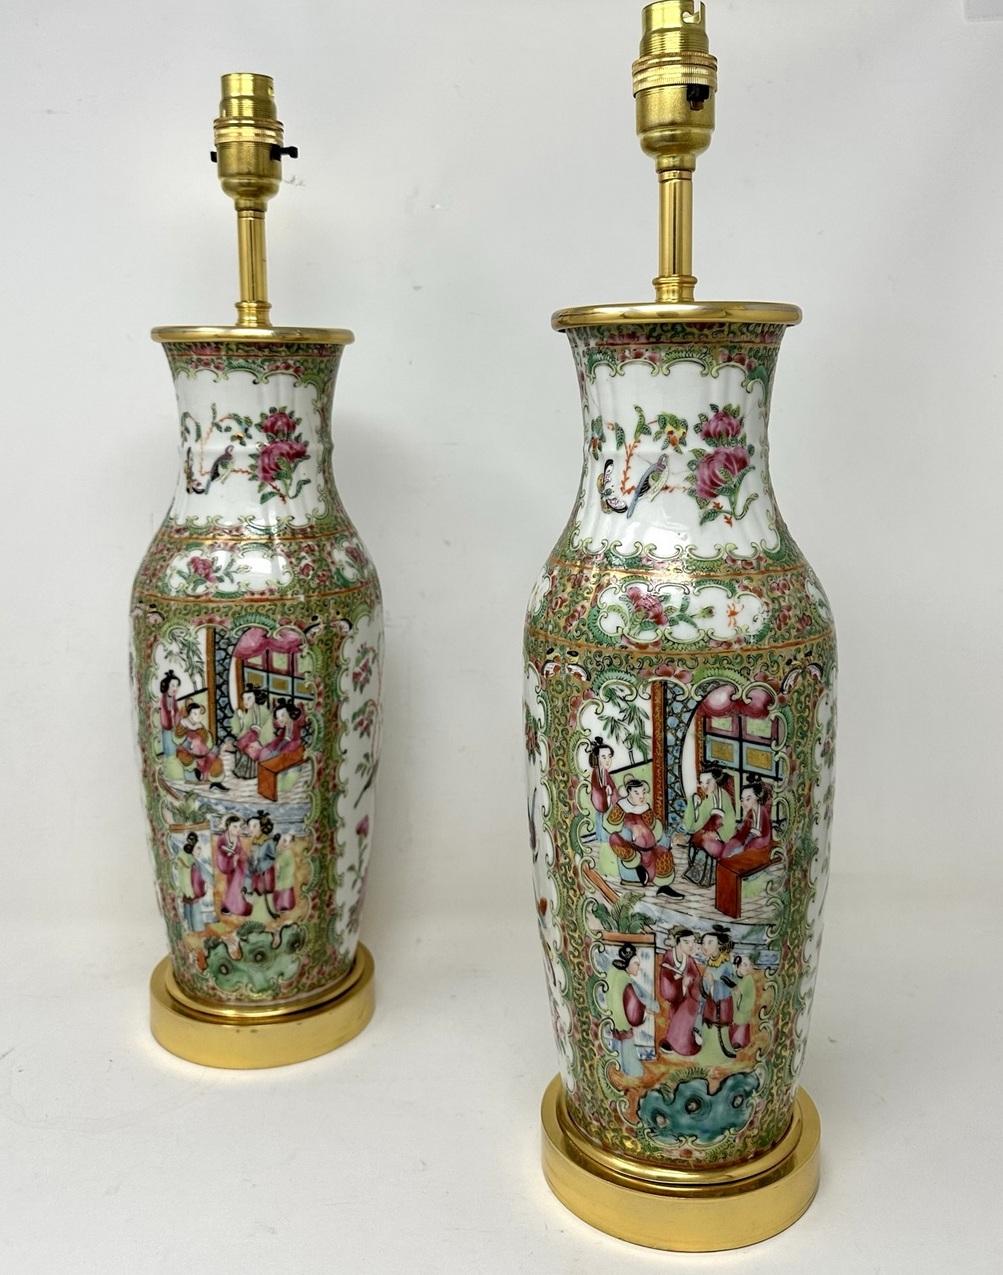 An Exceptionally Fine Pair of Cantonese Hand Decorated Porcelain Oil Lamps with ornate Ormolu bases now converted to Electric Table Lamps, of good size proportions, (see last image in situ) mid Nineteenth Century. 

The main outer bodies of bulbous